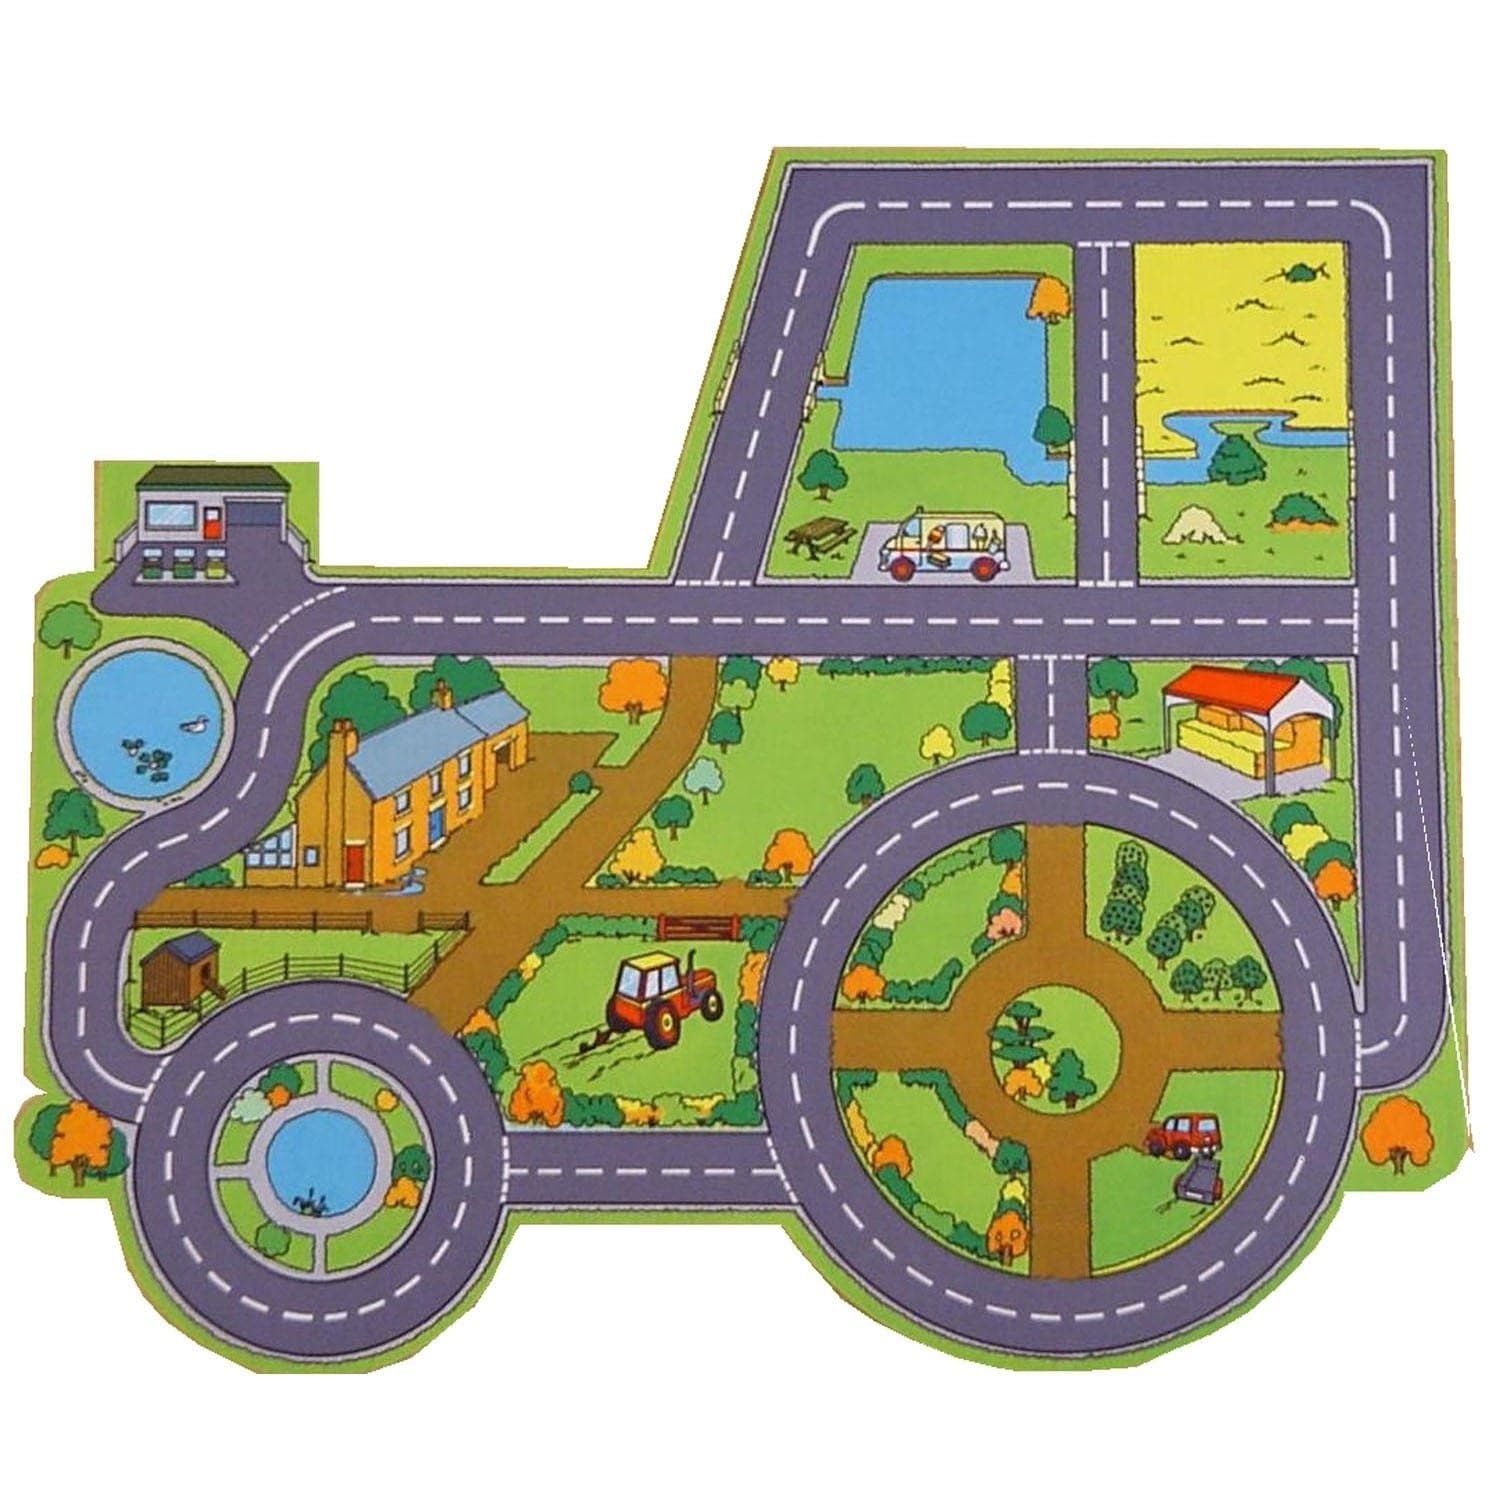 Tractor Farm Playmat, The Tractor Farm Play mat is designed for very young children. this mat is car shaped. Both roads and railways are illustrated using clear colourful design. The Tractor Farm Play Mat Play is printed on 100% polyester surface with a rubber anti-slip backing. Dimensions: 1000 x 860mm Large brightly coloured play mat will be a great addition for any youngster Simply packed with brilliant detail - they'll play happily for hours! A superb base for adding favourite farm animals, buildings, t